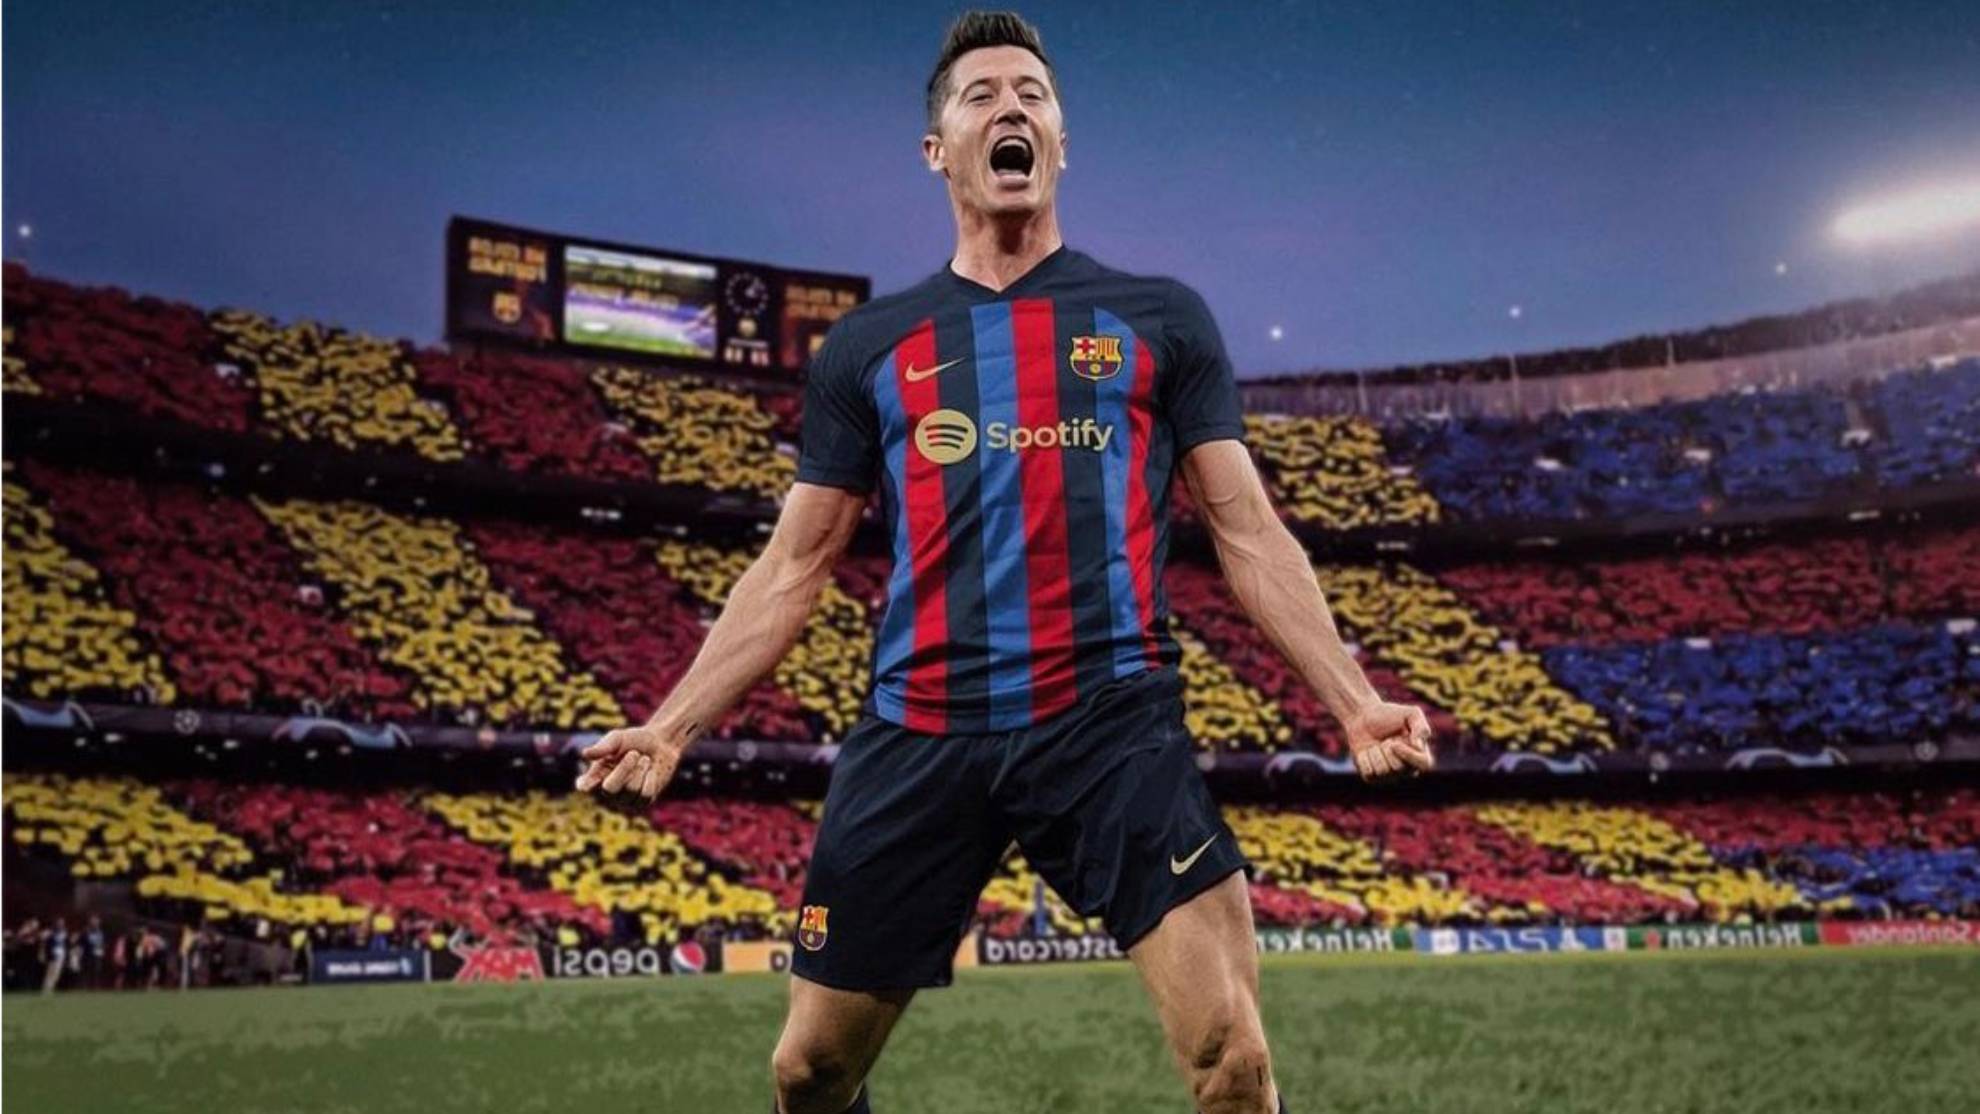 Robert Lewandowski had quite an impact at FC Barcelona. The Polish striker proved not only his goalscoring abilities but an amazing understanding of the game